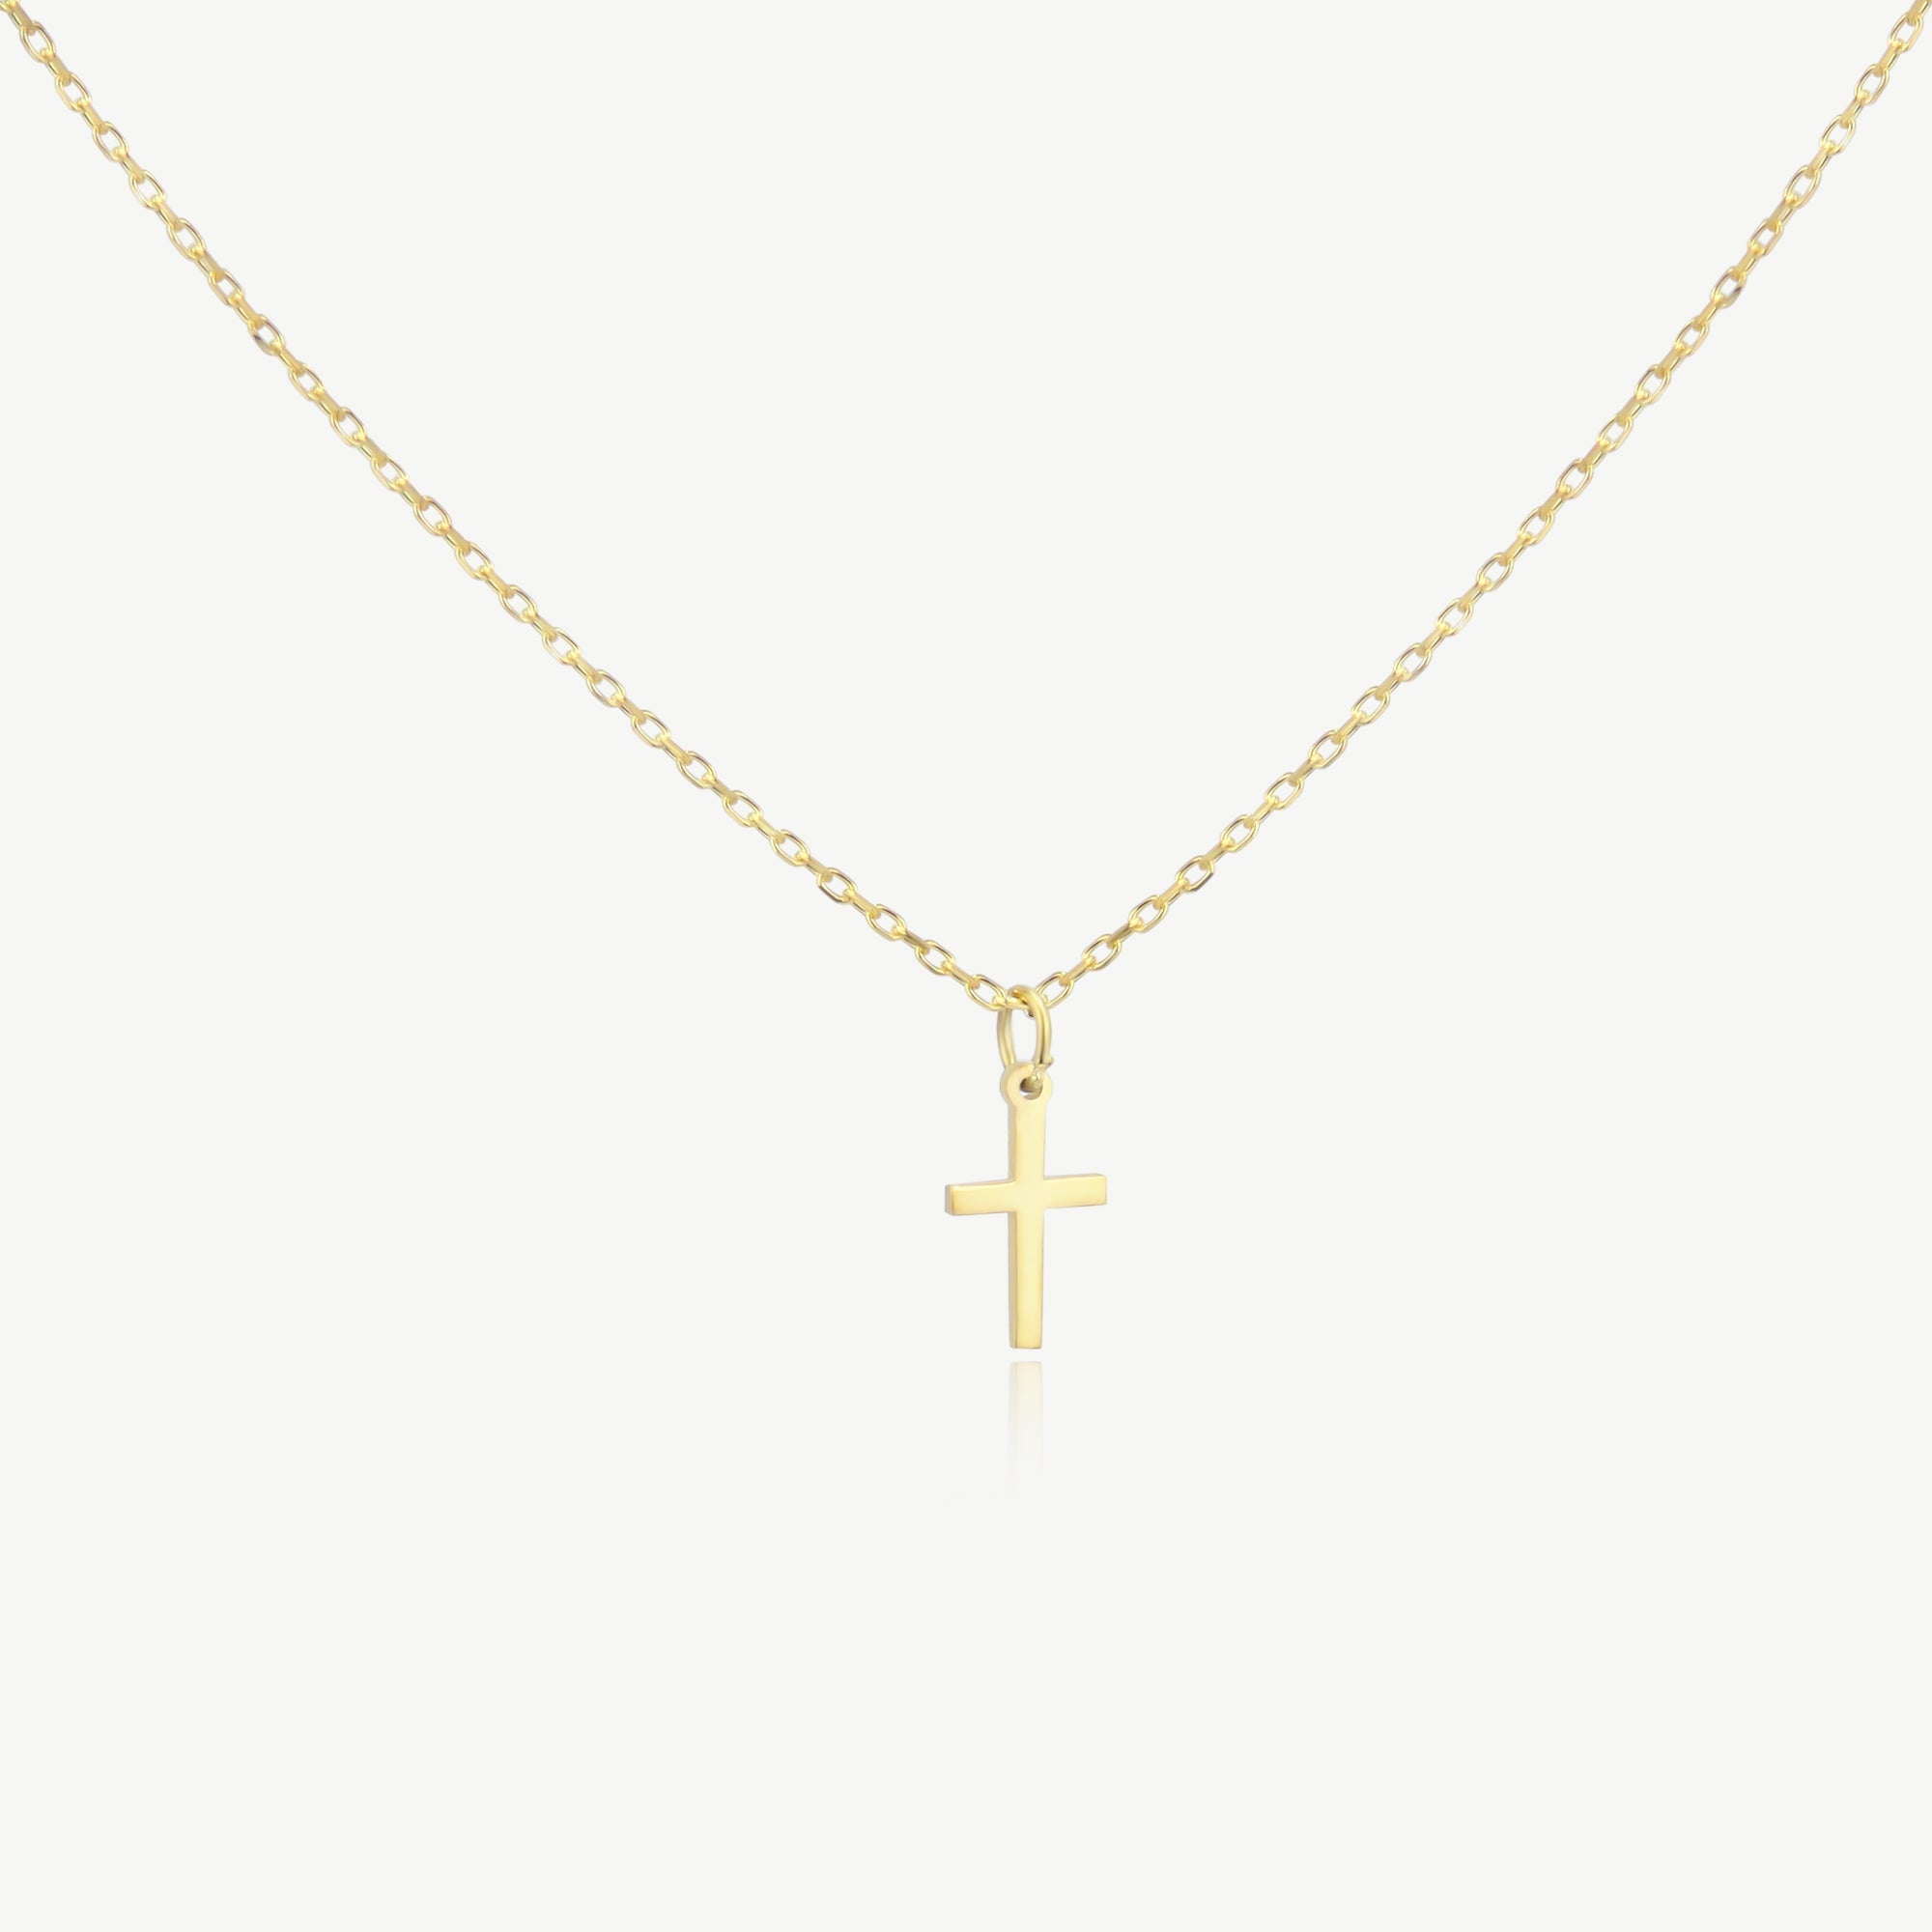 Gold-Plated Silver Cross Necklace